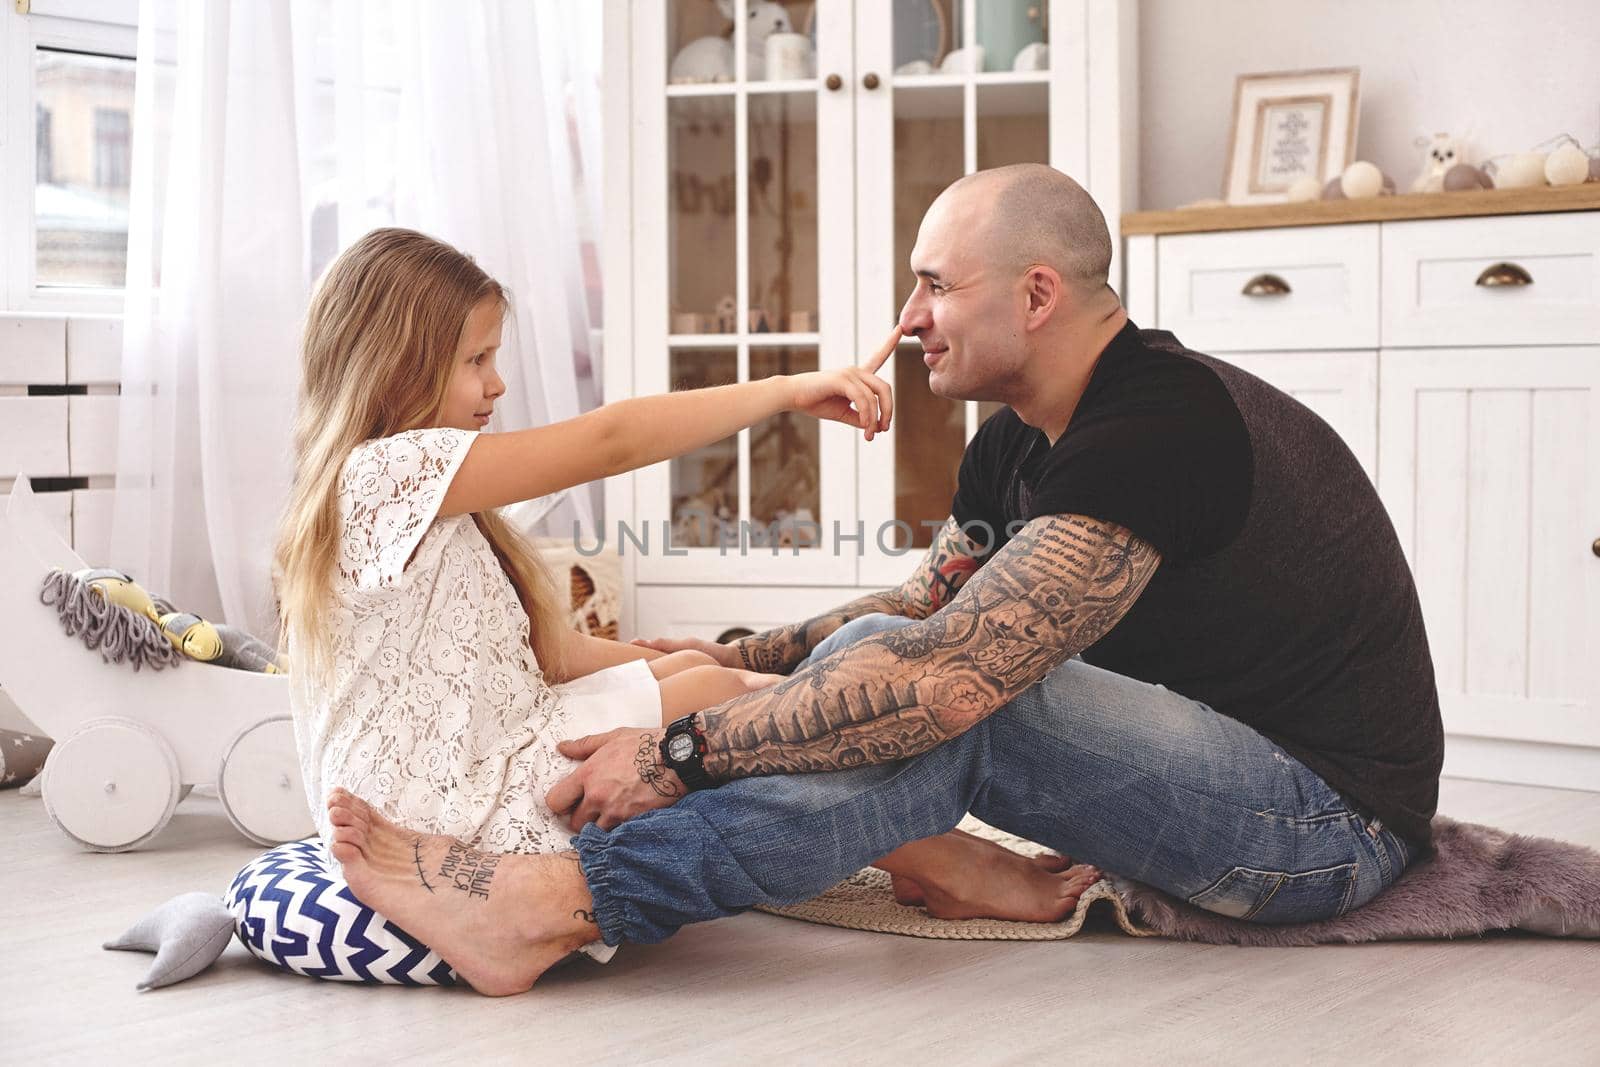 White modern kid's room whith a wooden furniture. Adorable daughter wearing a white dress is touching daddy's nose and looking with tenderness at him. Daddy with tattoos is hugging her. Friendly family spending their free time together sitting on a pillows.